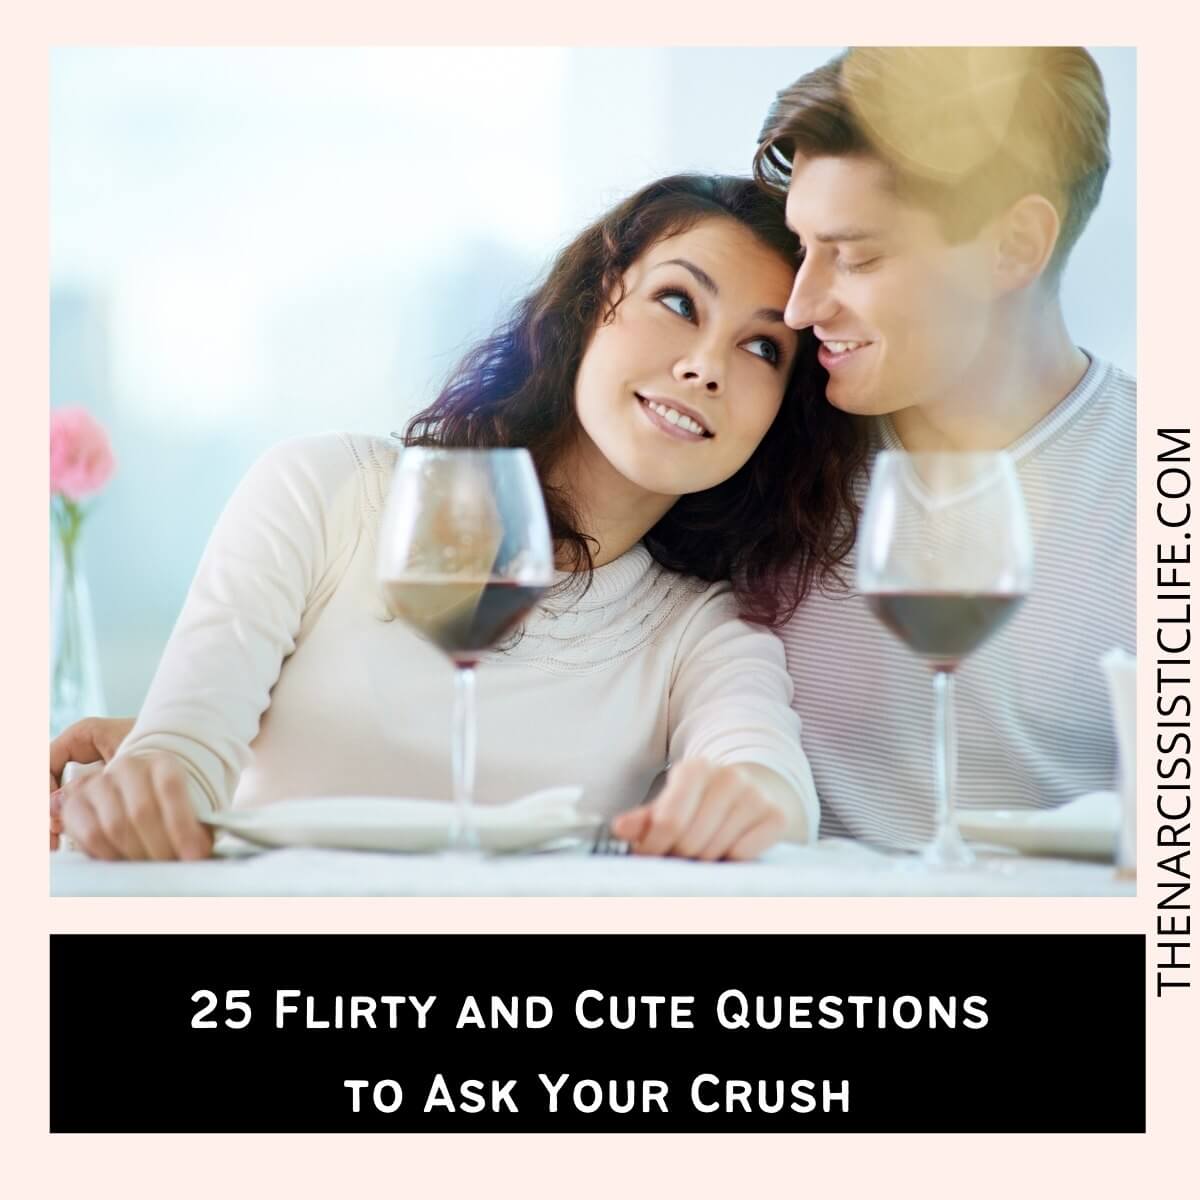 Questions to ask a crush